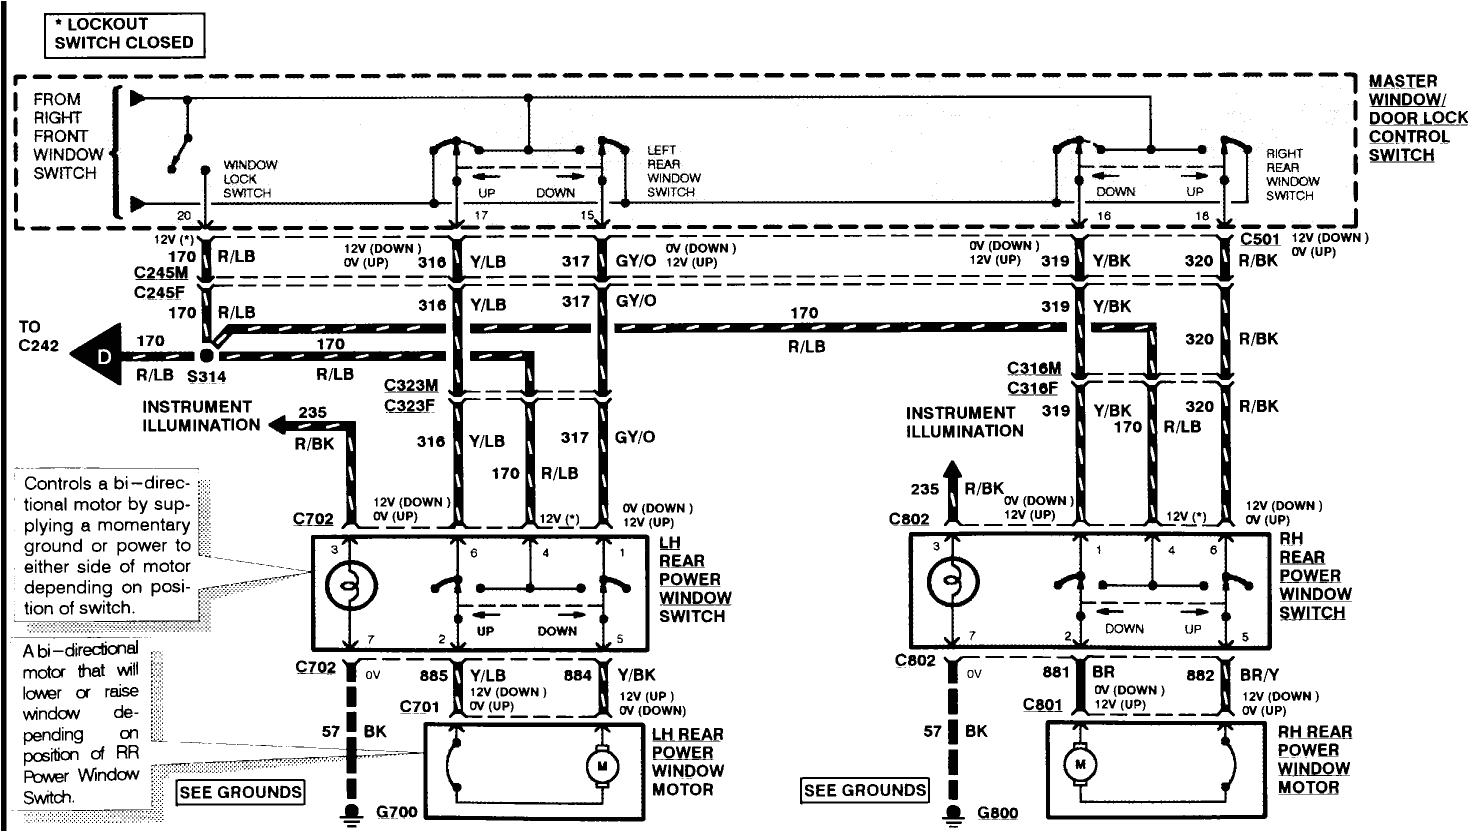 16 modules wiring diagrams 1998 ford explorer wiring diagram todays 02 ford explorer transmission 1998 ford explorer 2012 ford explorer engine diagram wiring diagrams scematic gif